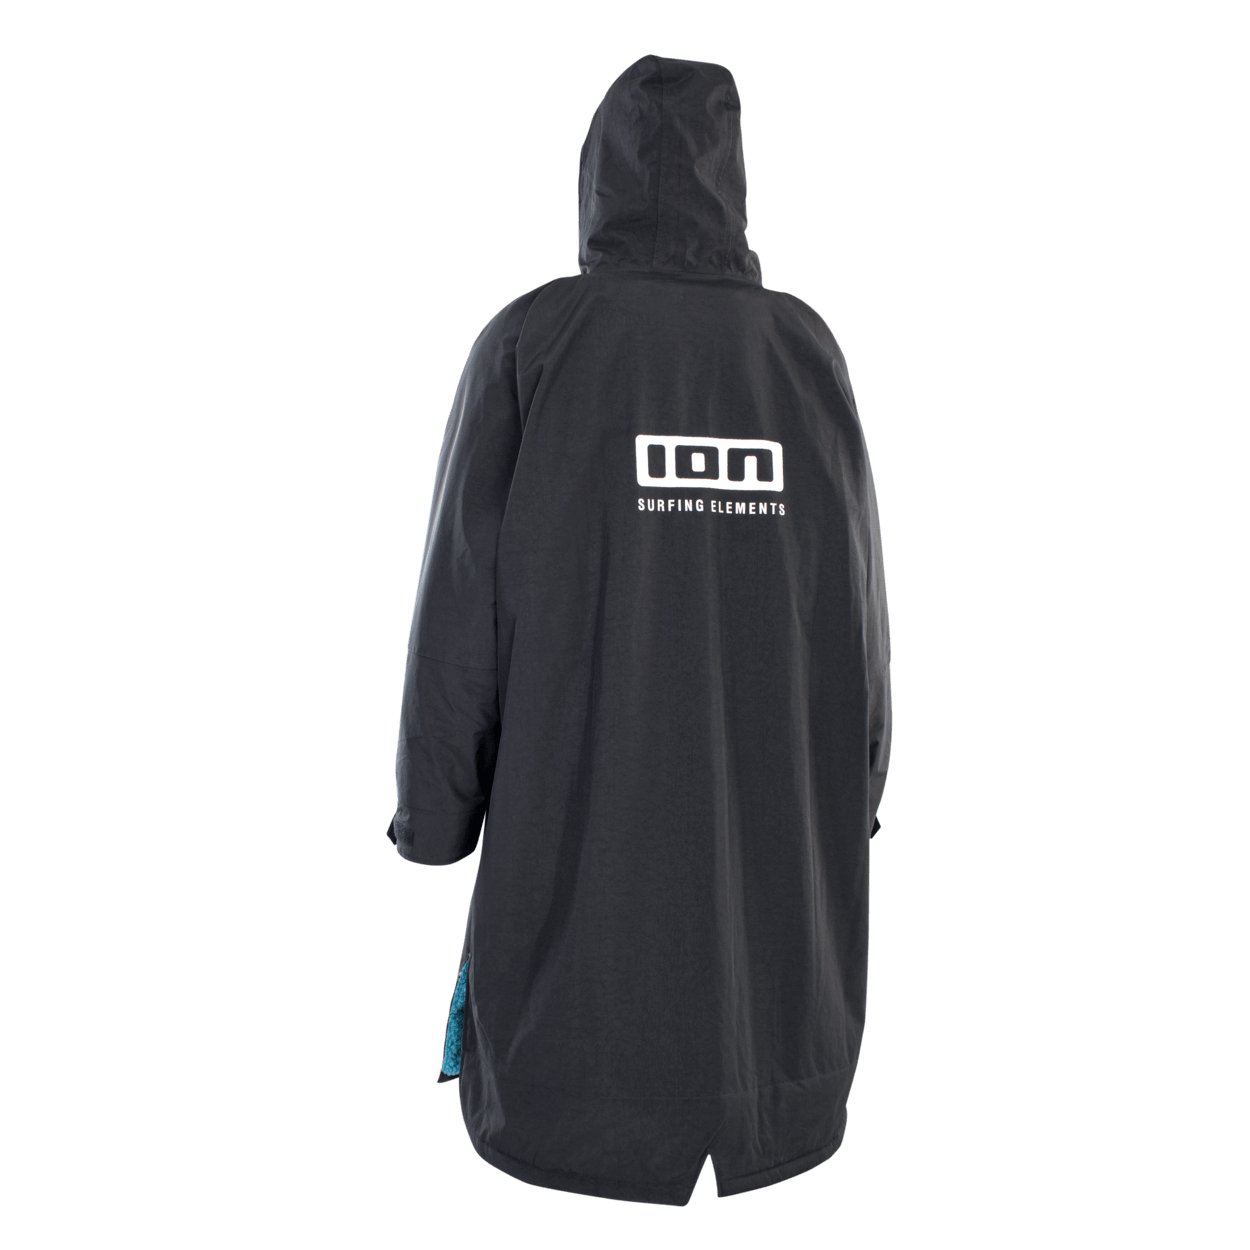 ION Storm Coat 2022 - Worthing Watersports - 9010583062358 - Accessories - ION Water